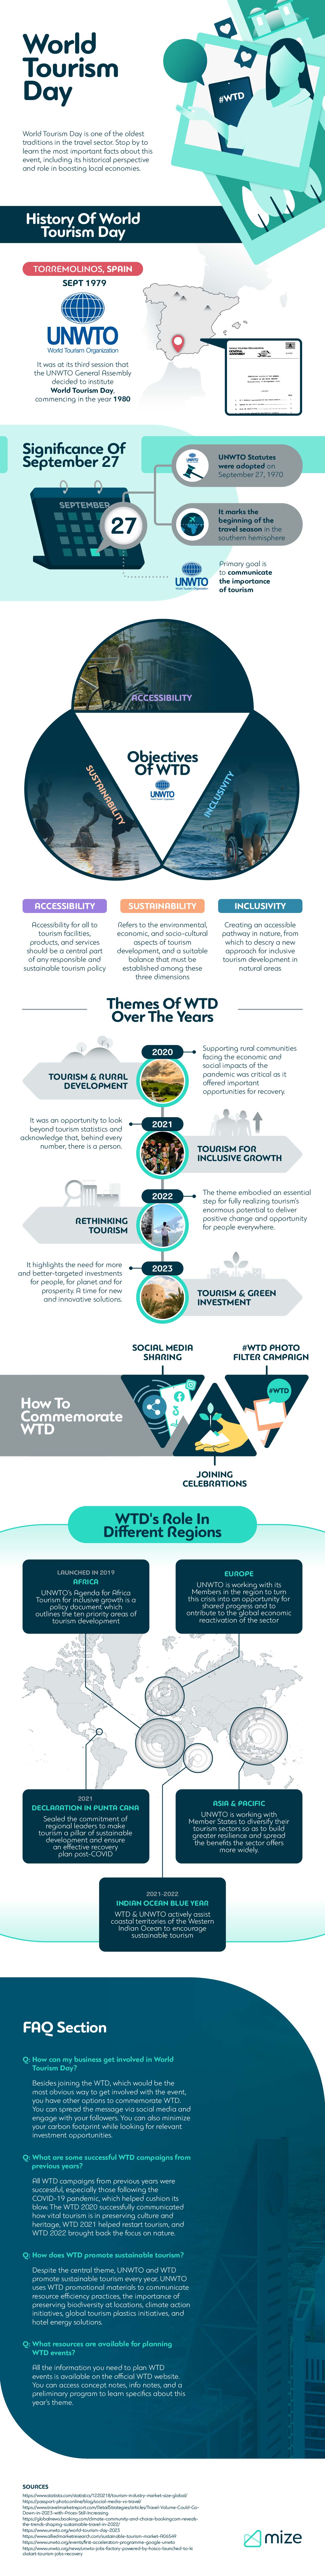 Infographic about world tourism day